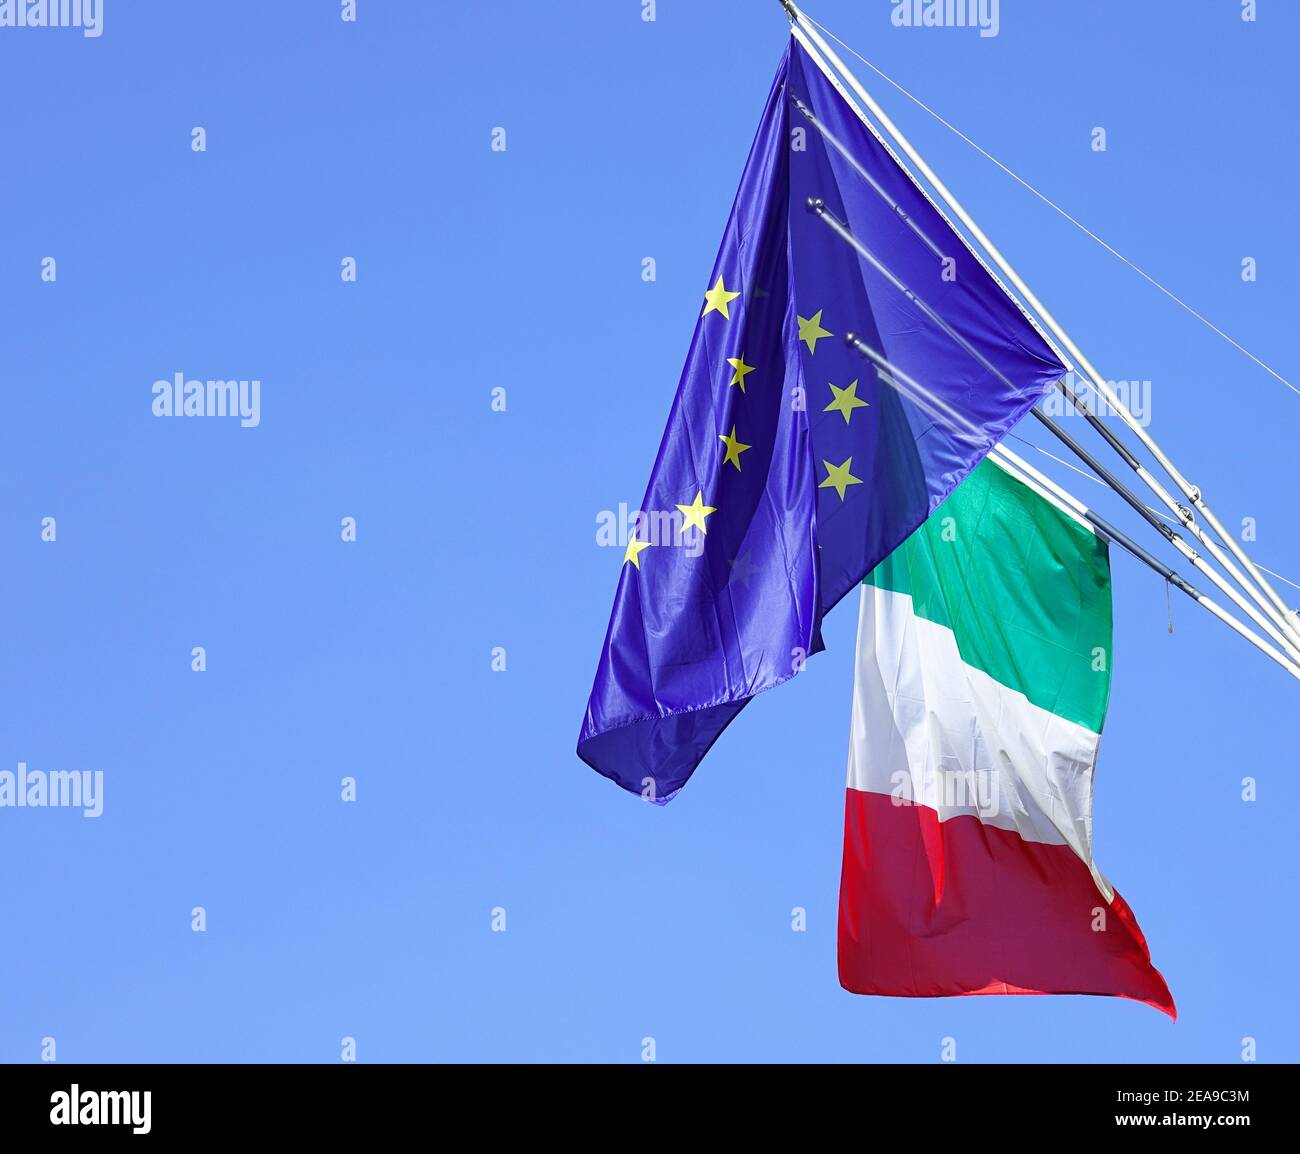 Italy flag and Europe flag waving together Stock Photo